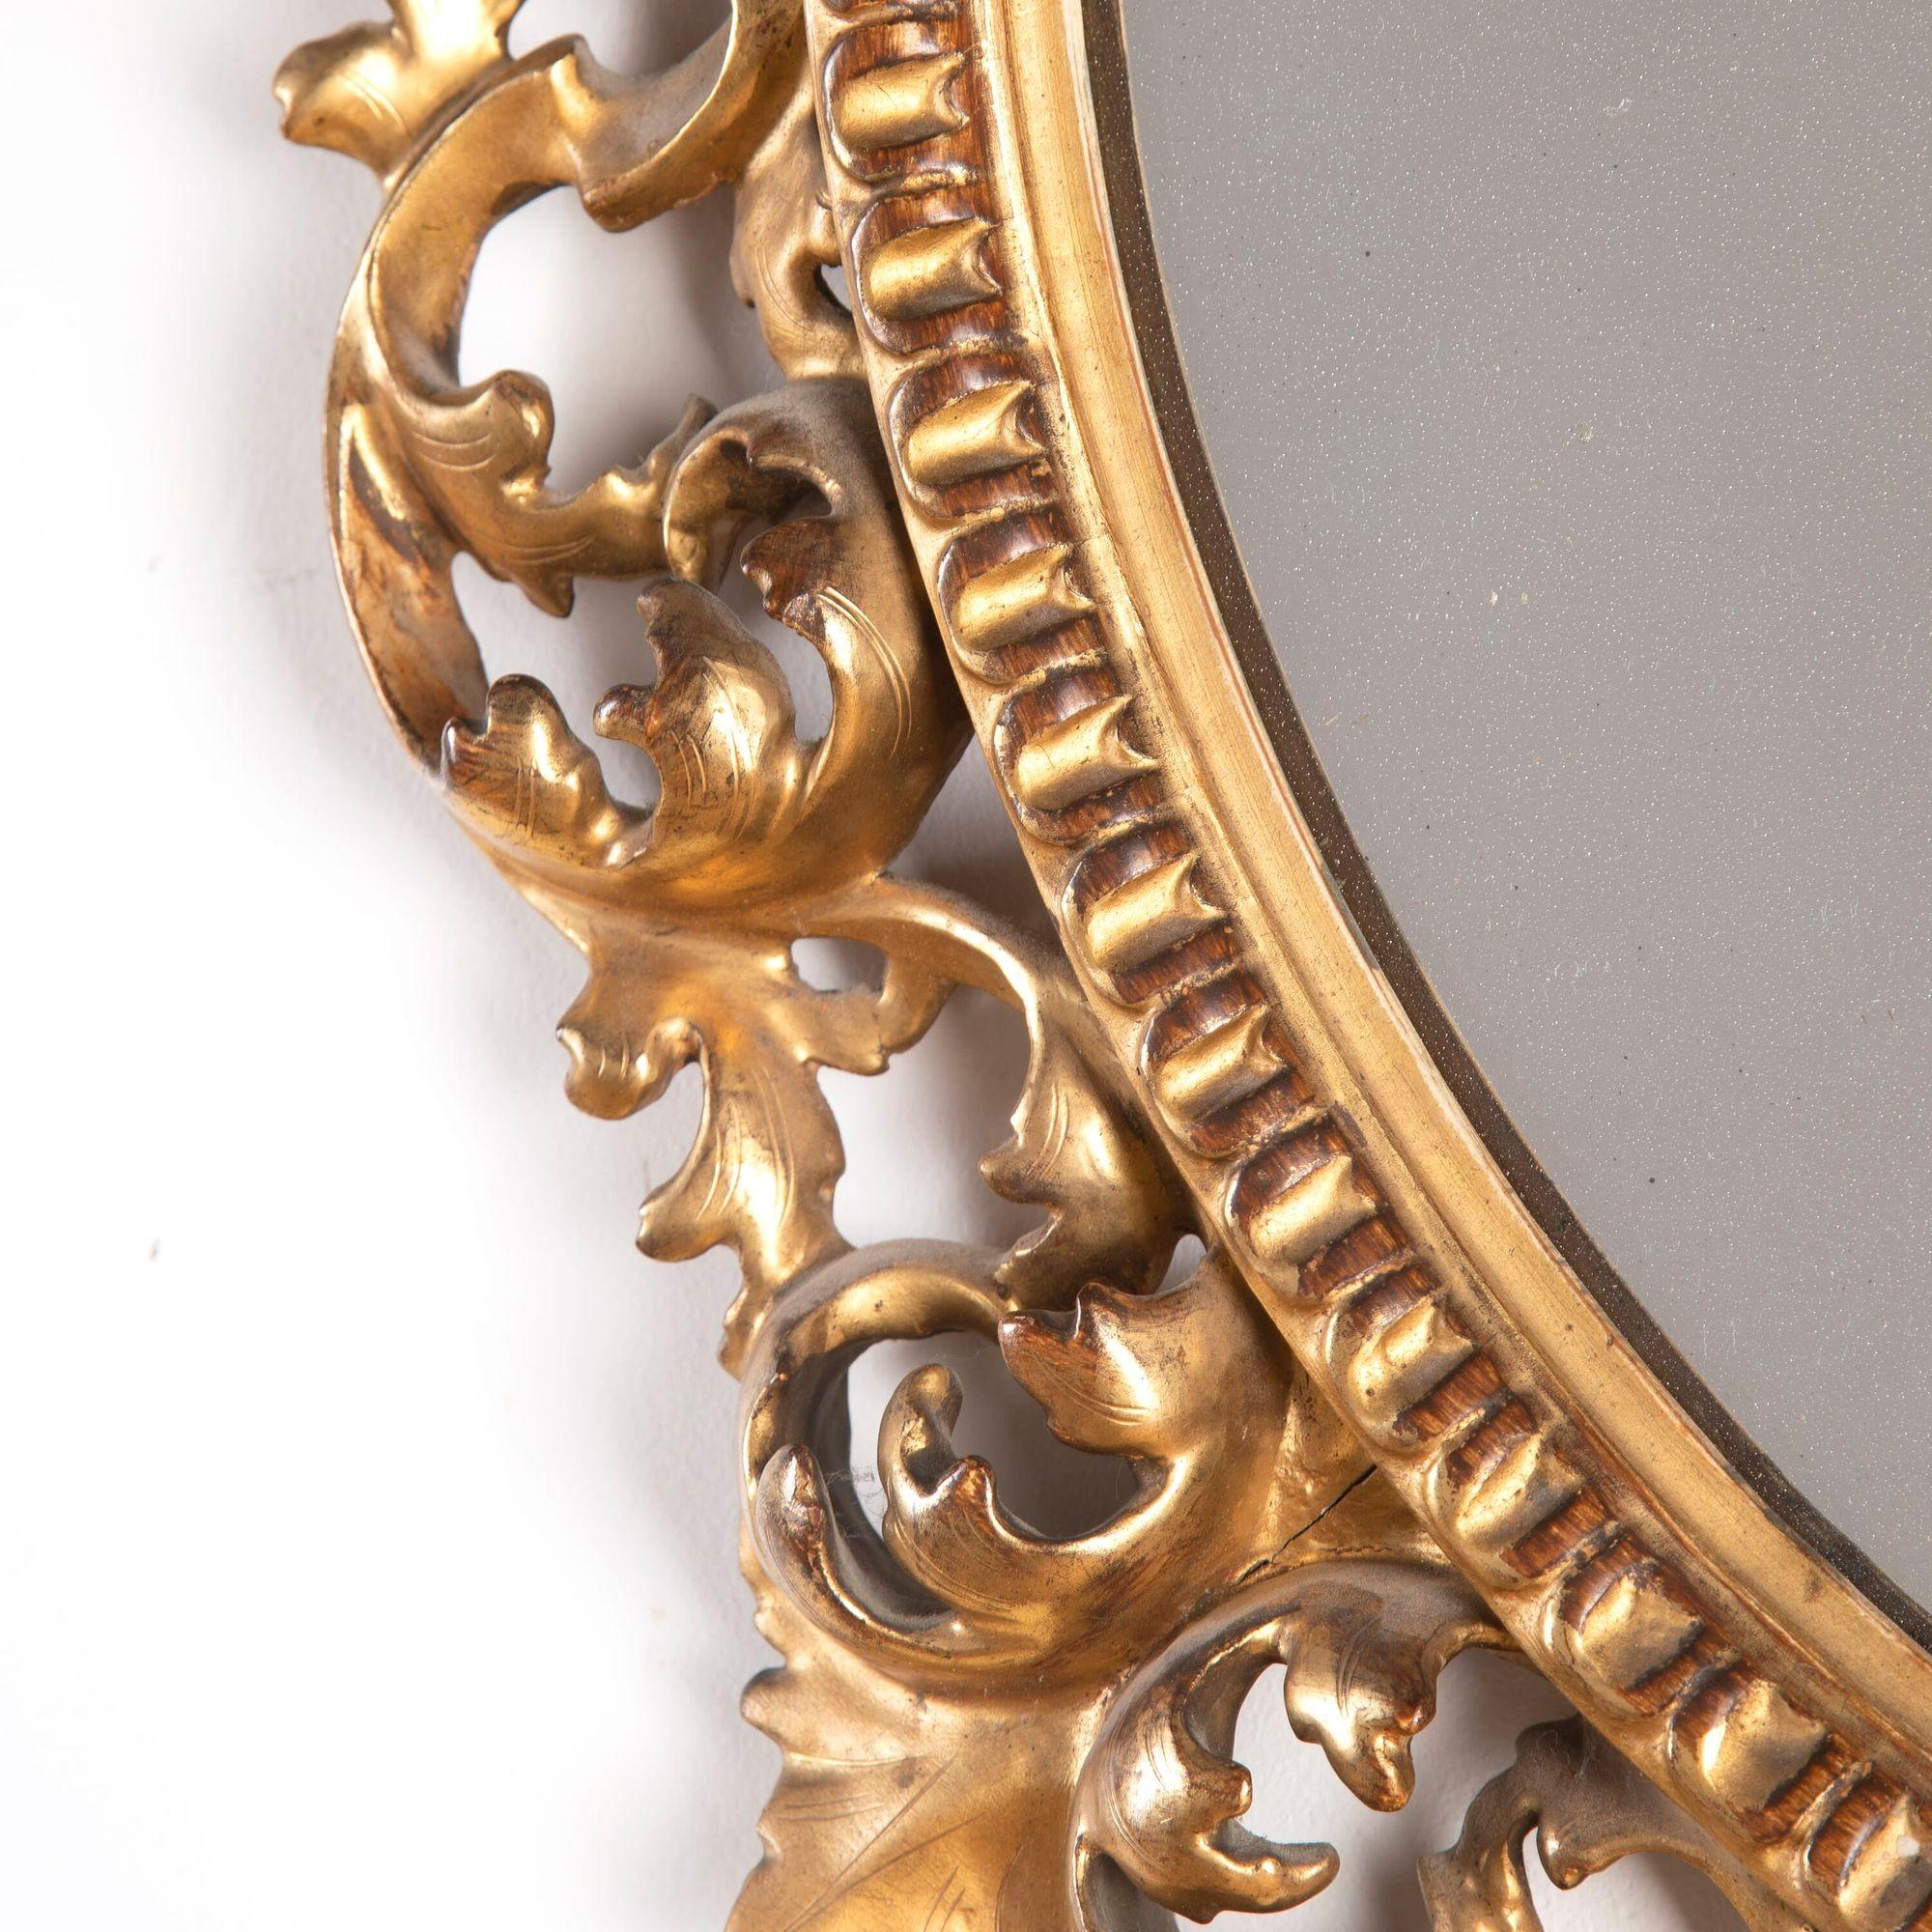 Exceptional pair of circular mirrors in late 19th century gilded and carved wooden Florentine frames.
These mirrors are of superb quality and still retain the maker's label of this most prestigious, leading supplier of furniture to the English